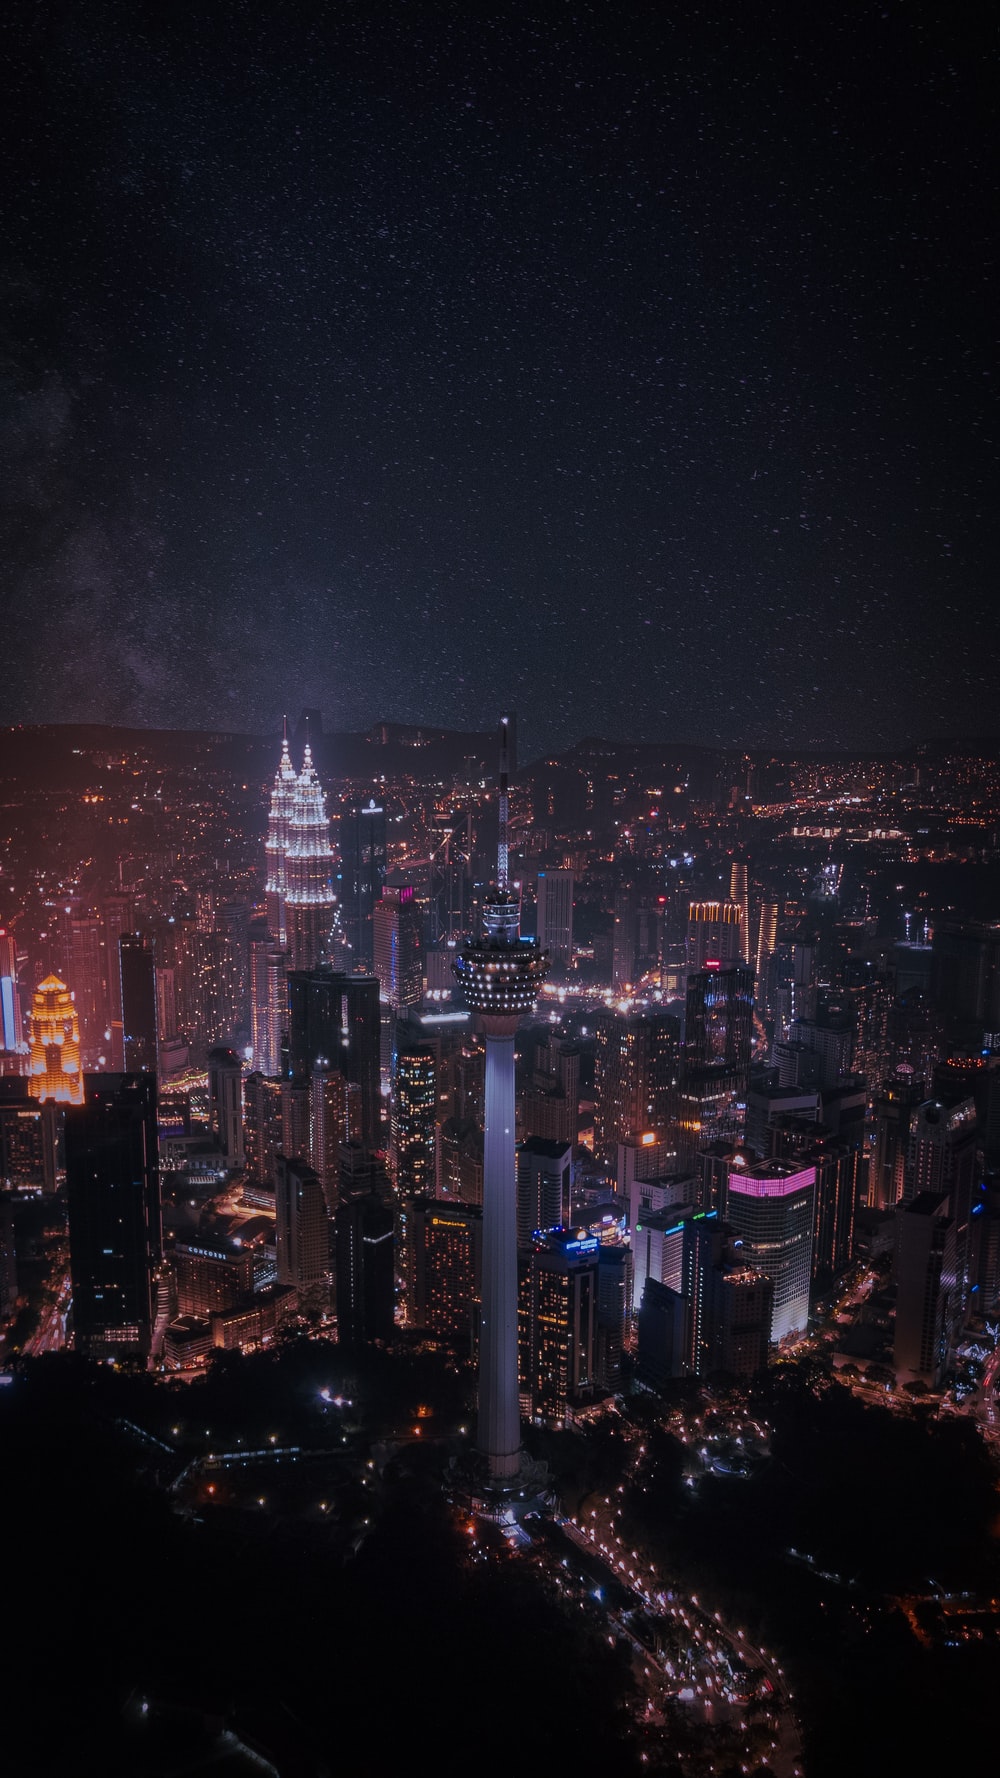 City Night Picture [HD]. Download Free Image